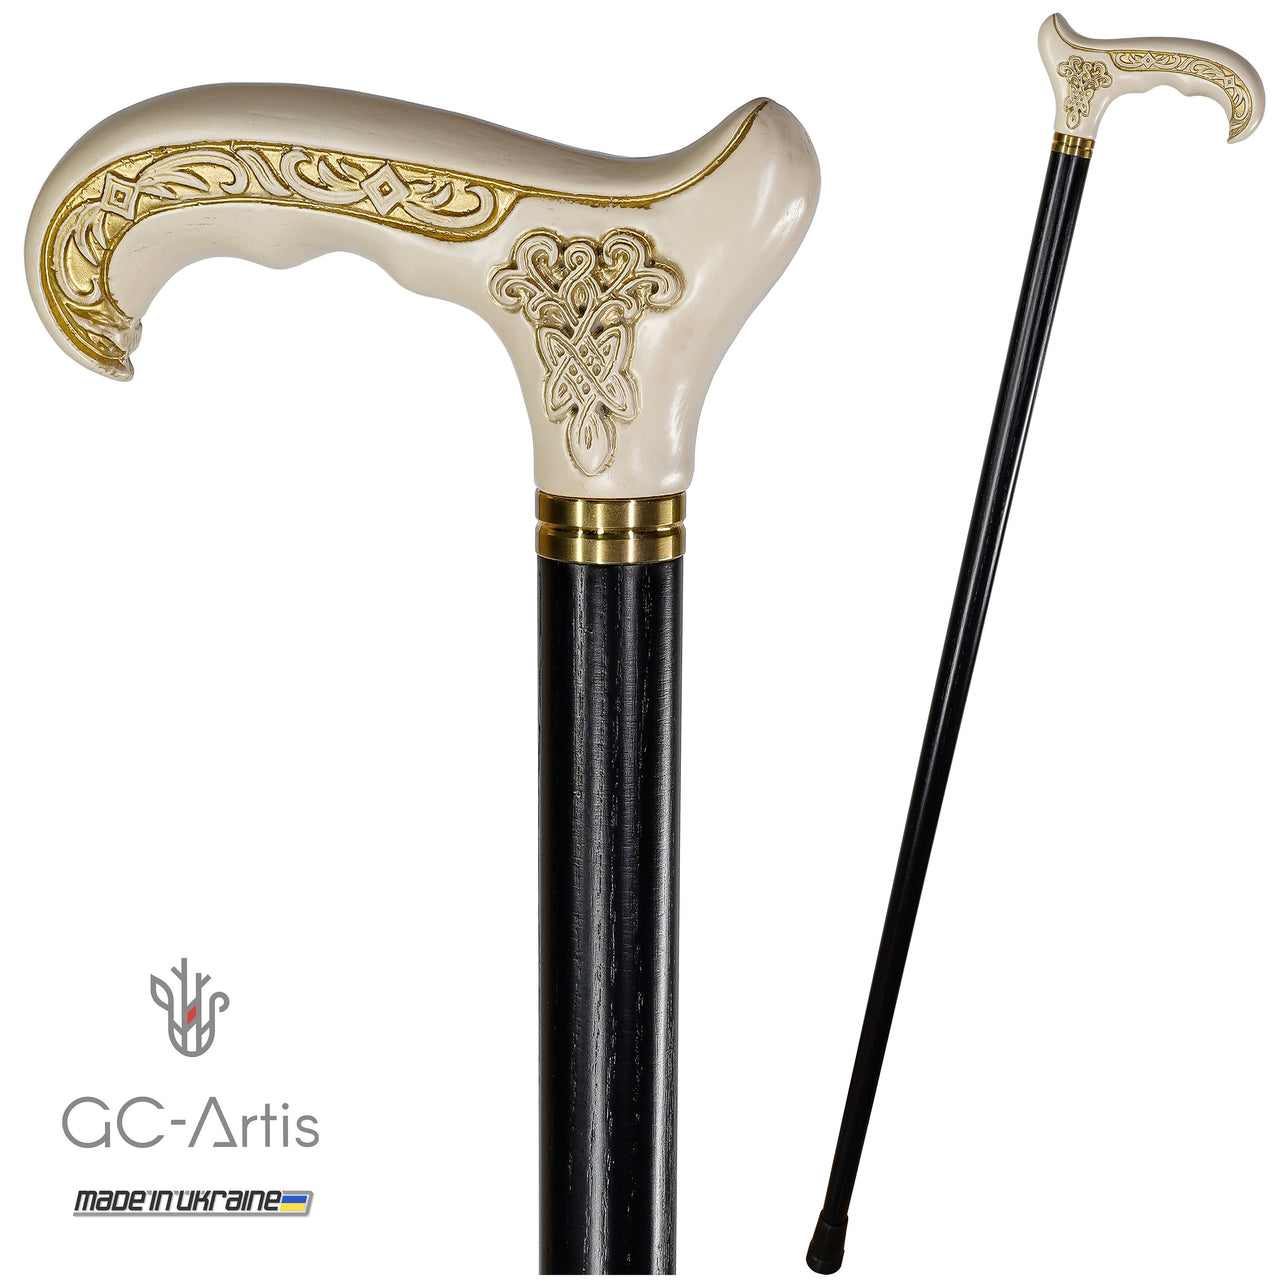 Wooden Cane Walking Stick with Celtic Ornament